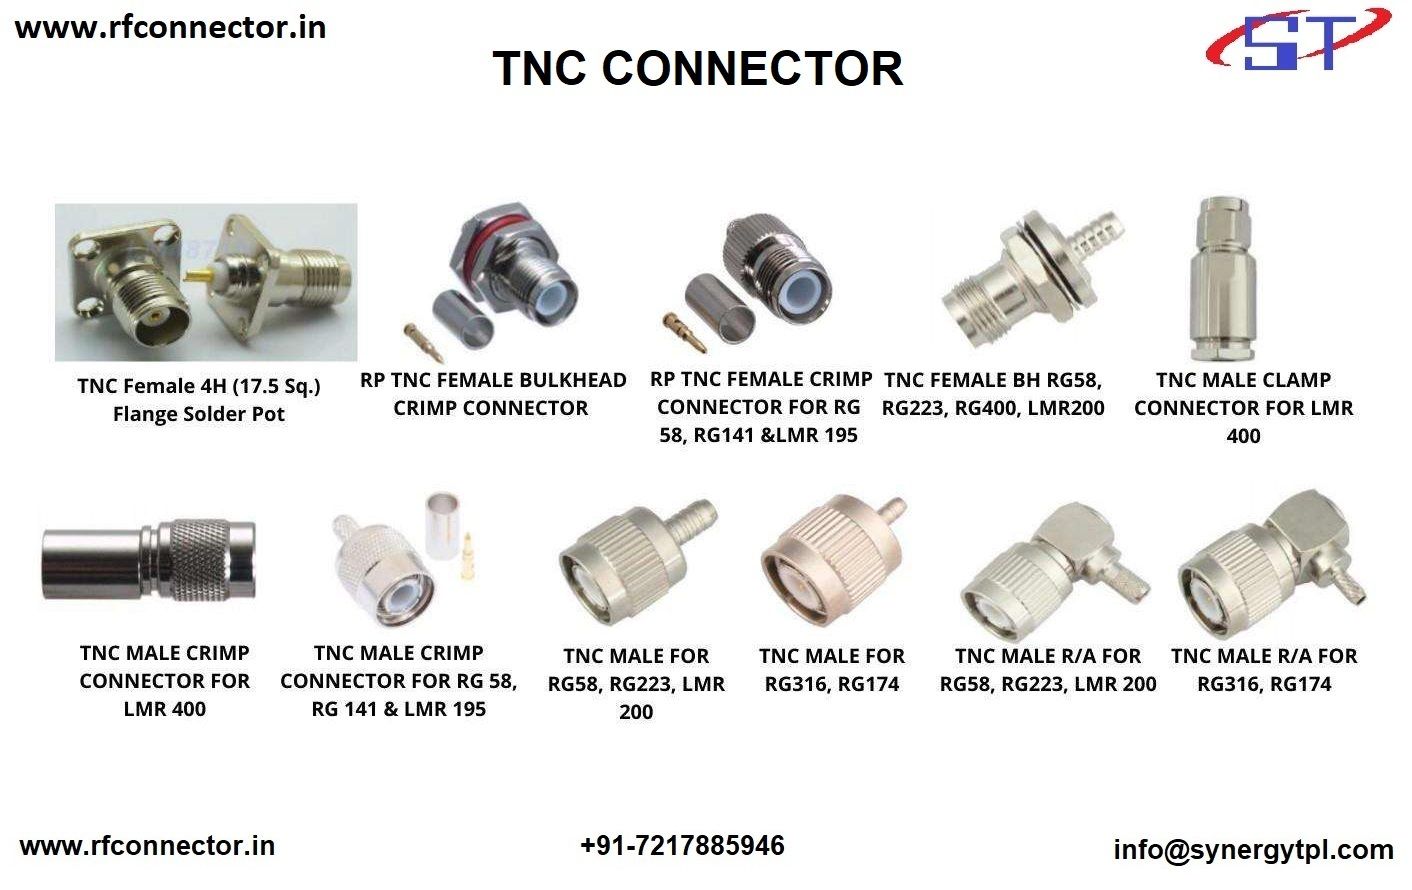 TNC Male Clamp Connector for LMR 240 cable